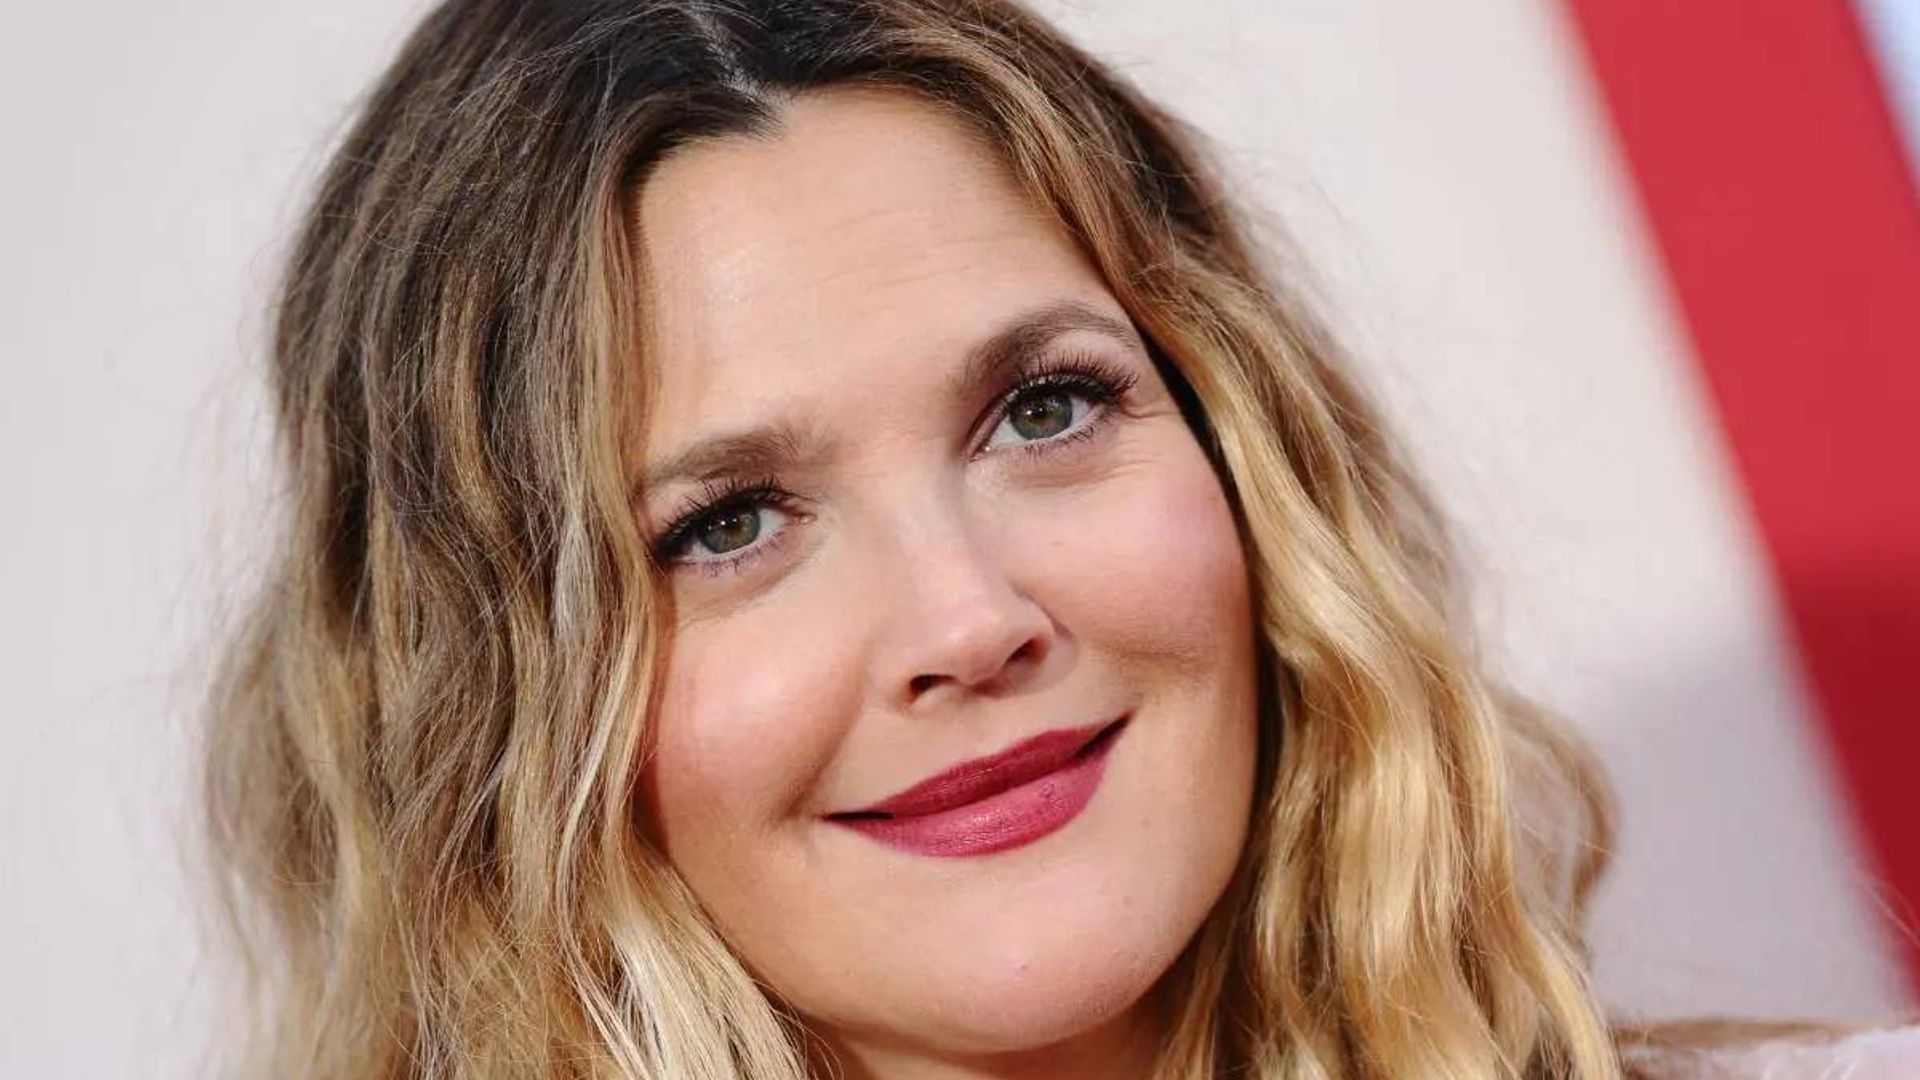 drew-barrymore-unrecognisable-new-photo